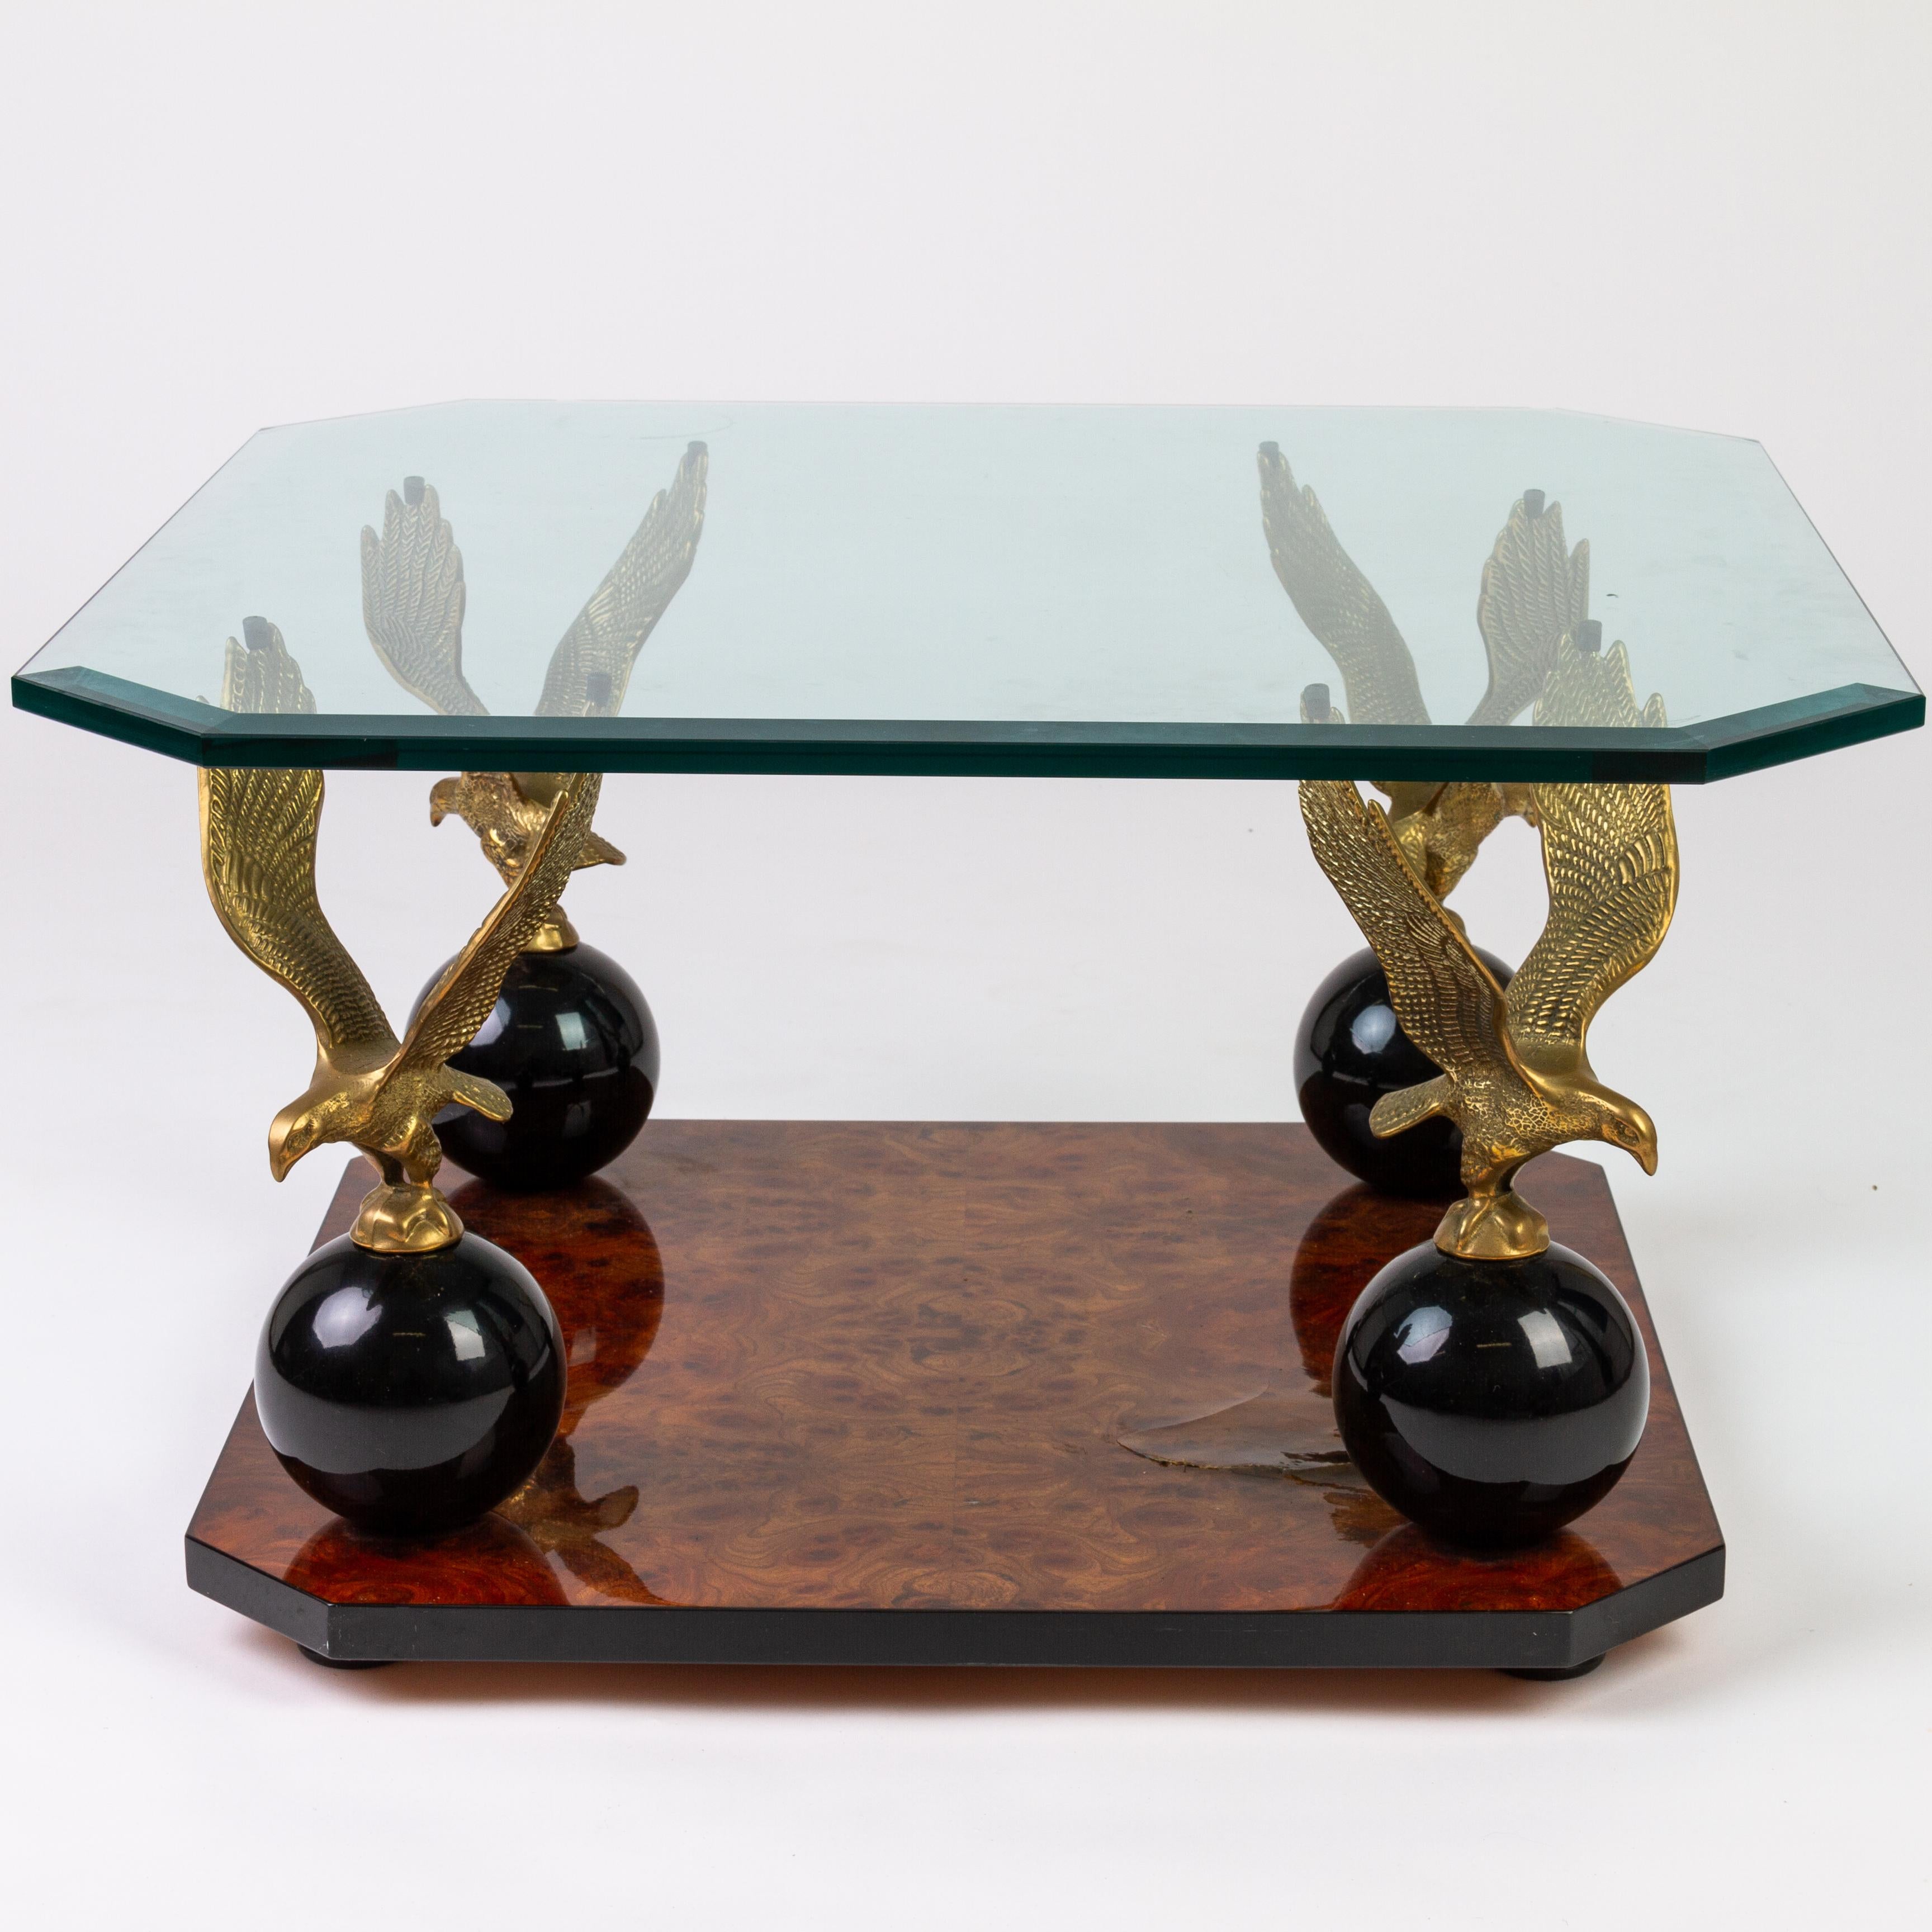 A stunning and elegant Beveled Glass Burr Walnut Eagles Coffee Table
With glass top and brass eagle sculptures resting on black spheres
There is a crack in one corner of the table on the burr walnut surface, but this doesn't detract much from the